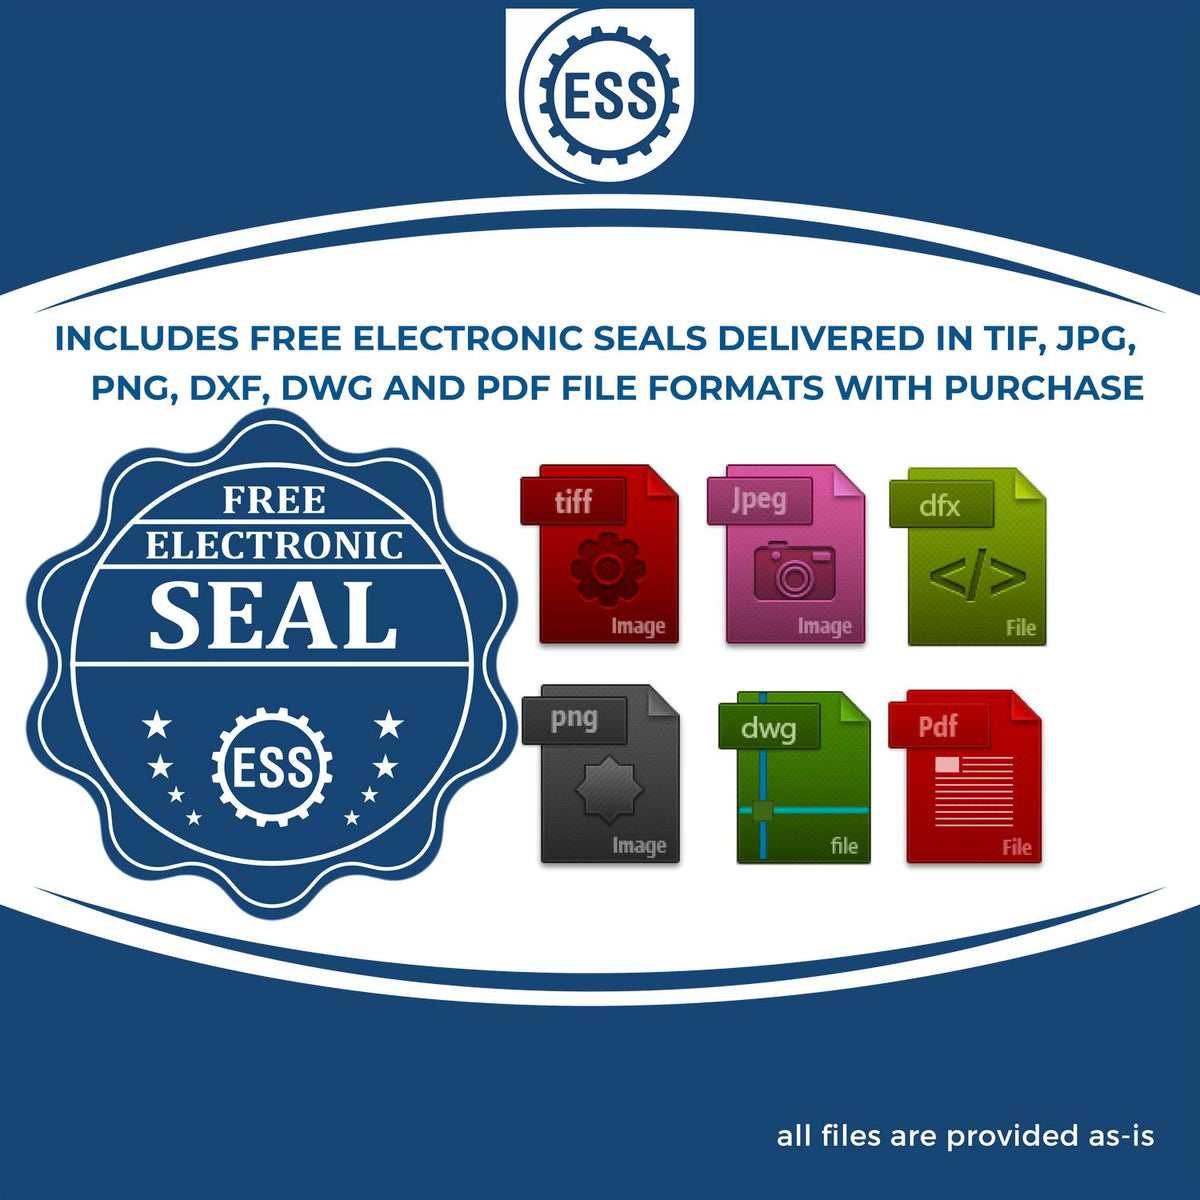 An infographic for the free electronic seal for the Idaho Geologist Desk Seal illustrating the different file type icons such as DXF, DWG, TIF, JPG and PNG.